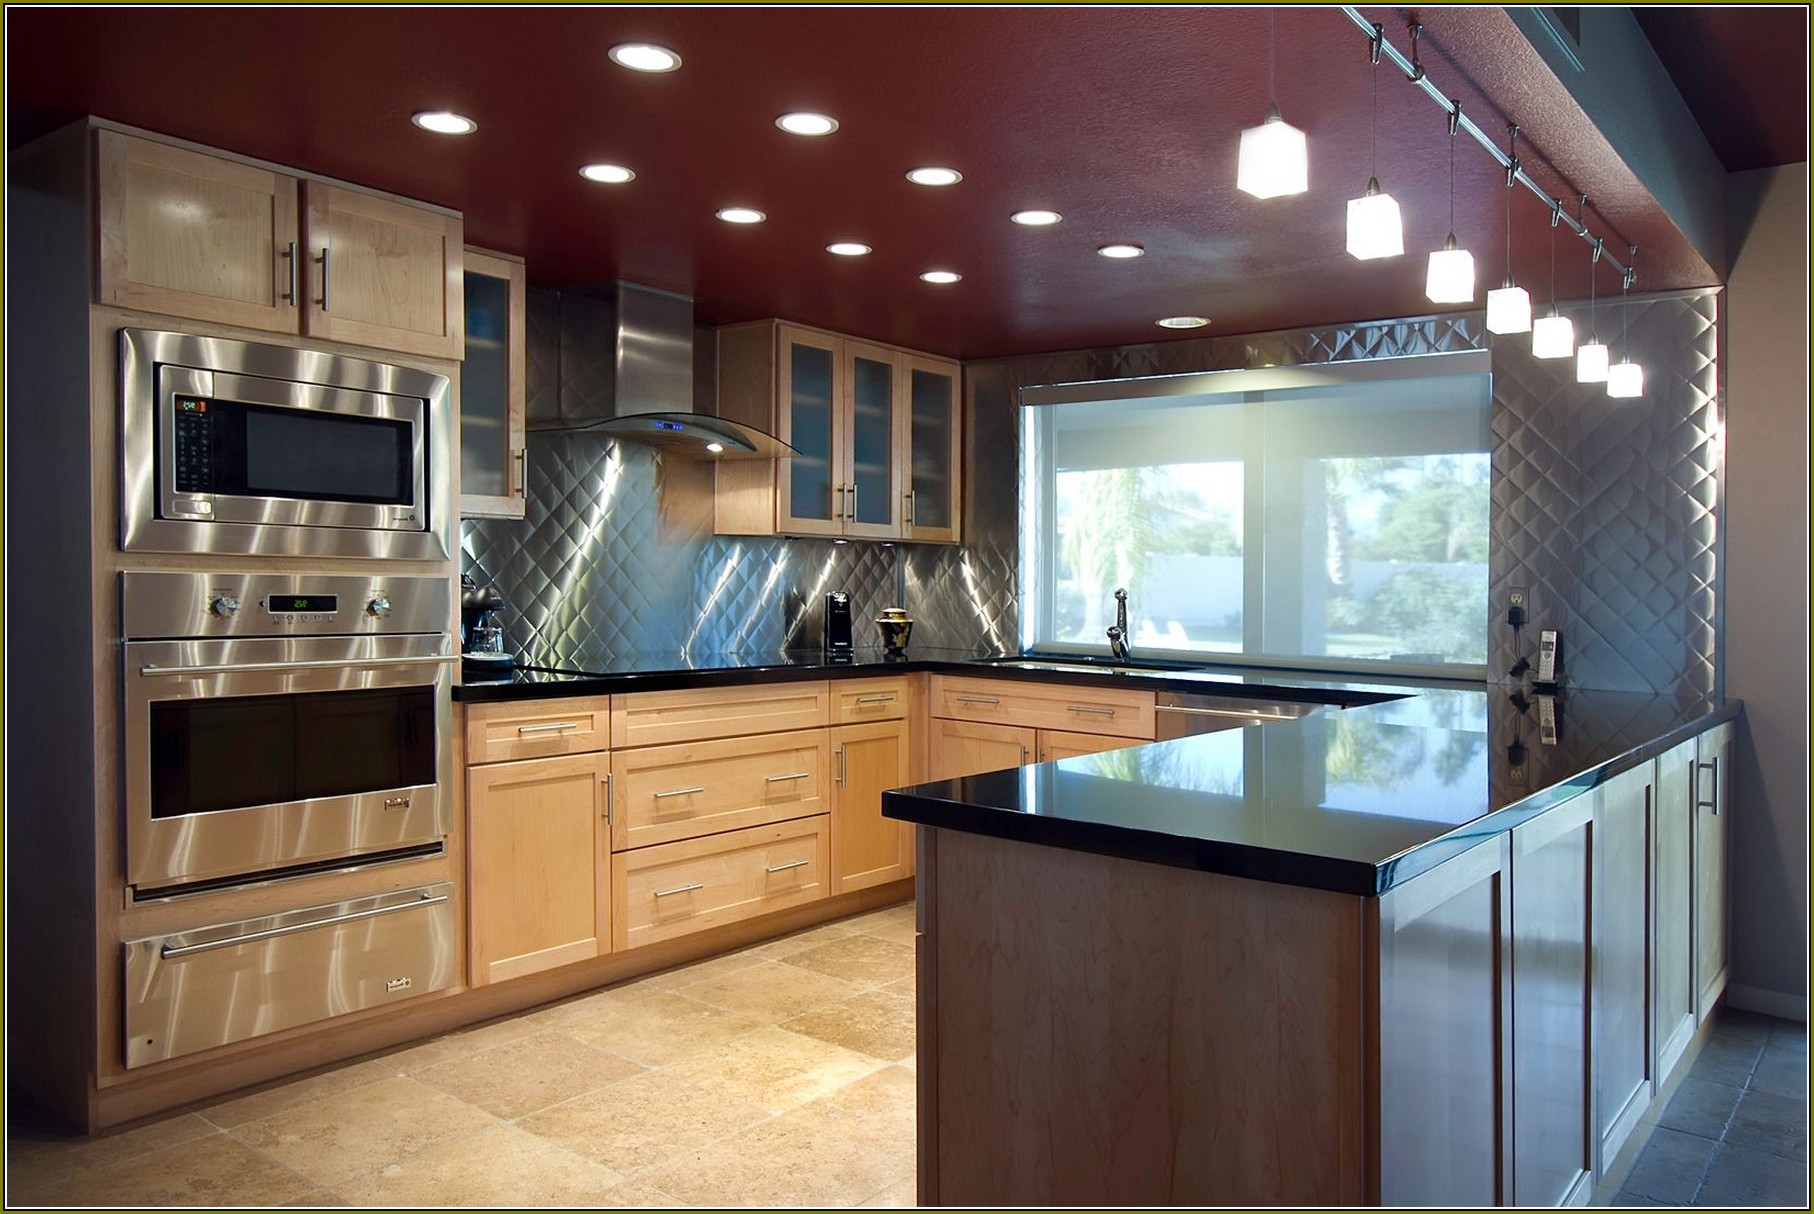 Kitchen Cabinets Home Depot Vs Lowes